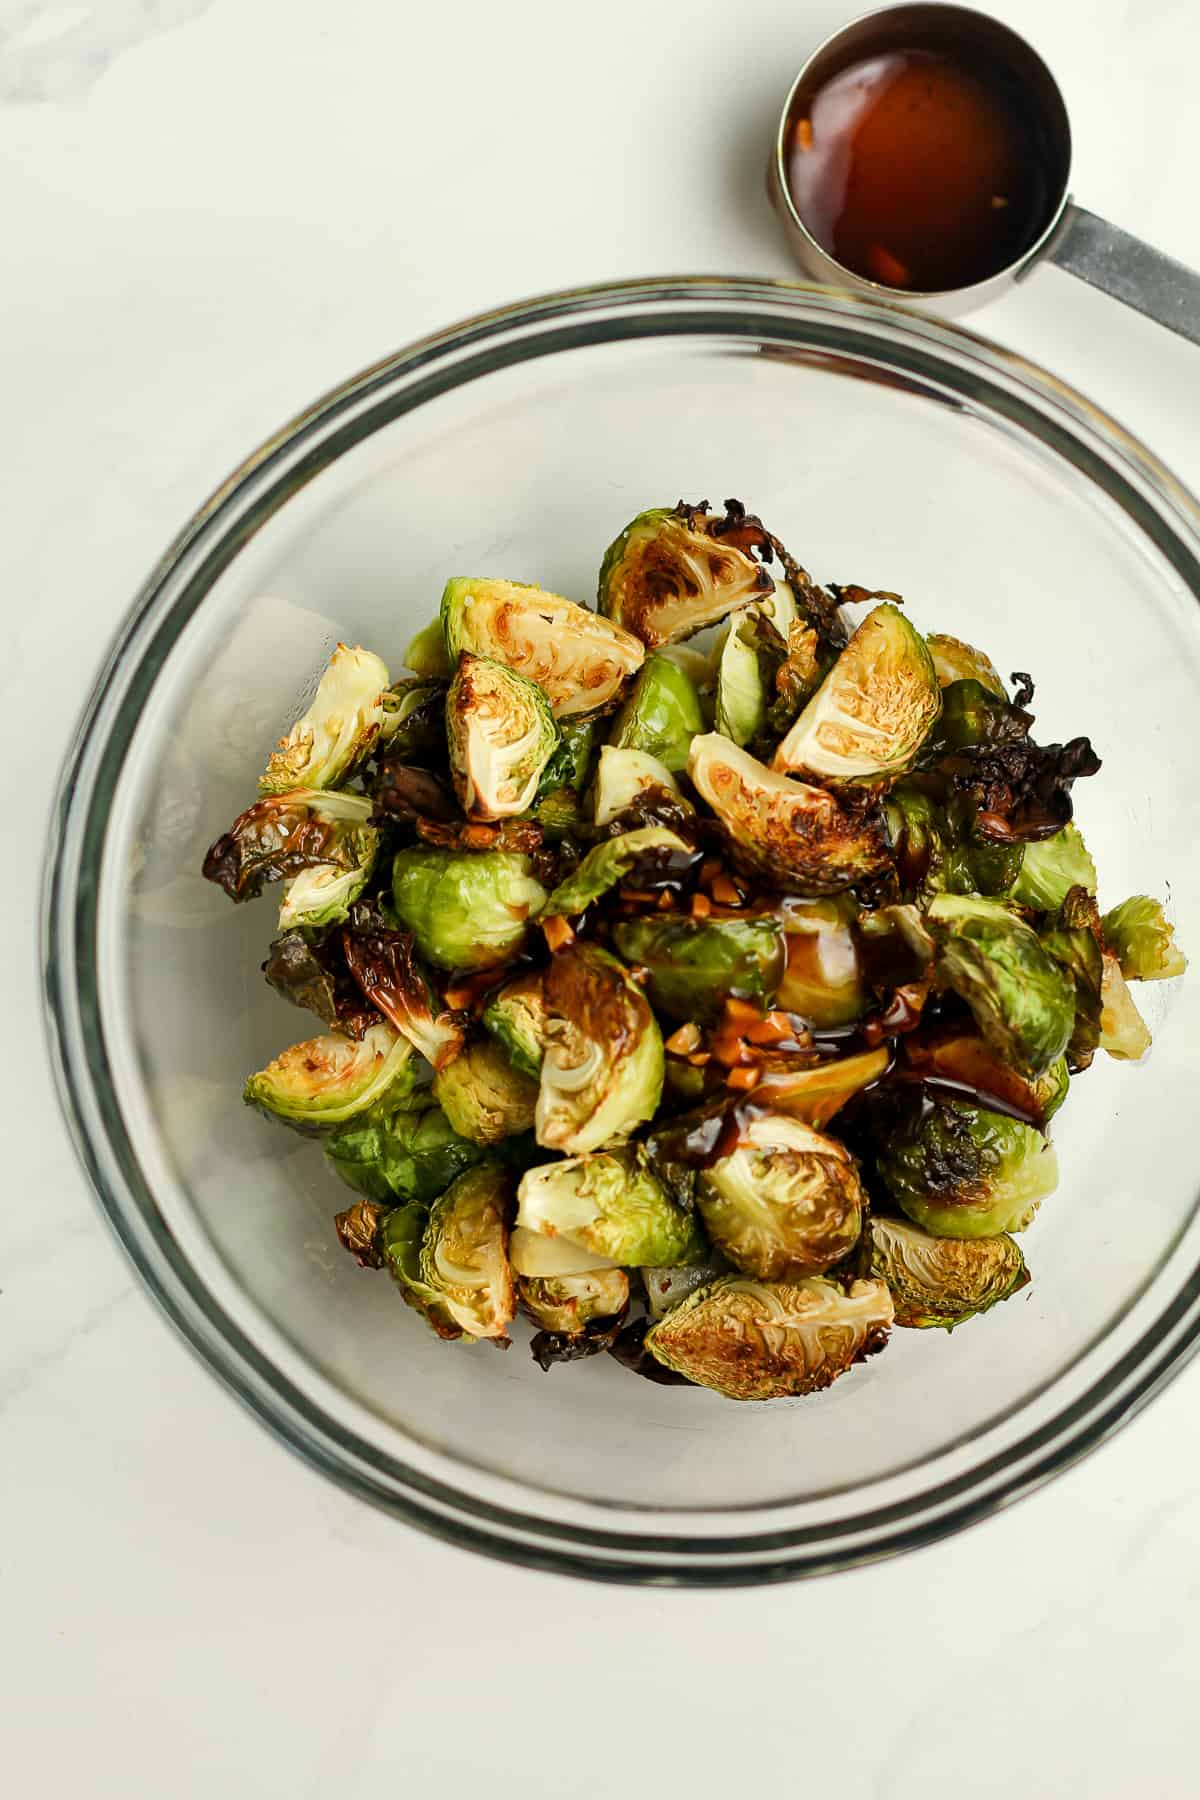 The cooked Brussels with teriyaki sauce on top.